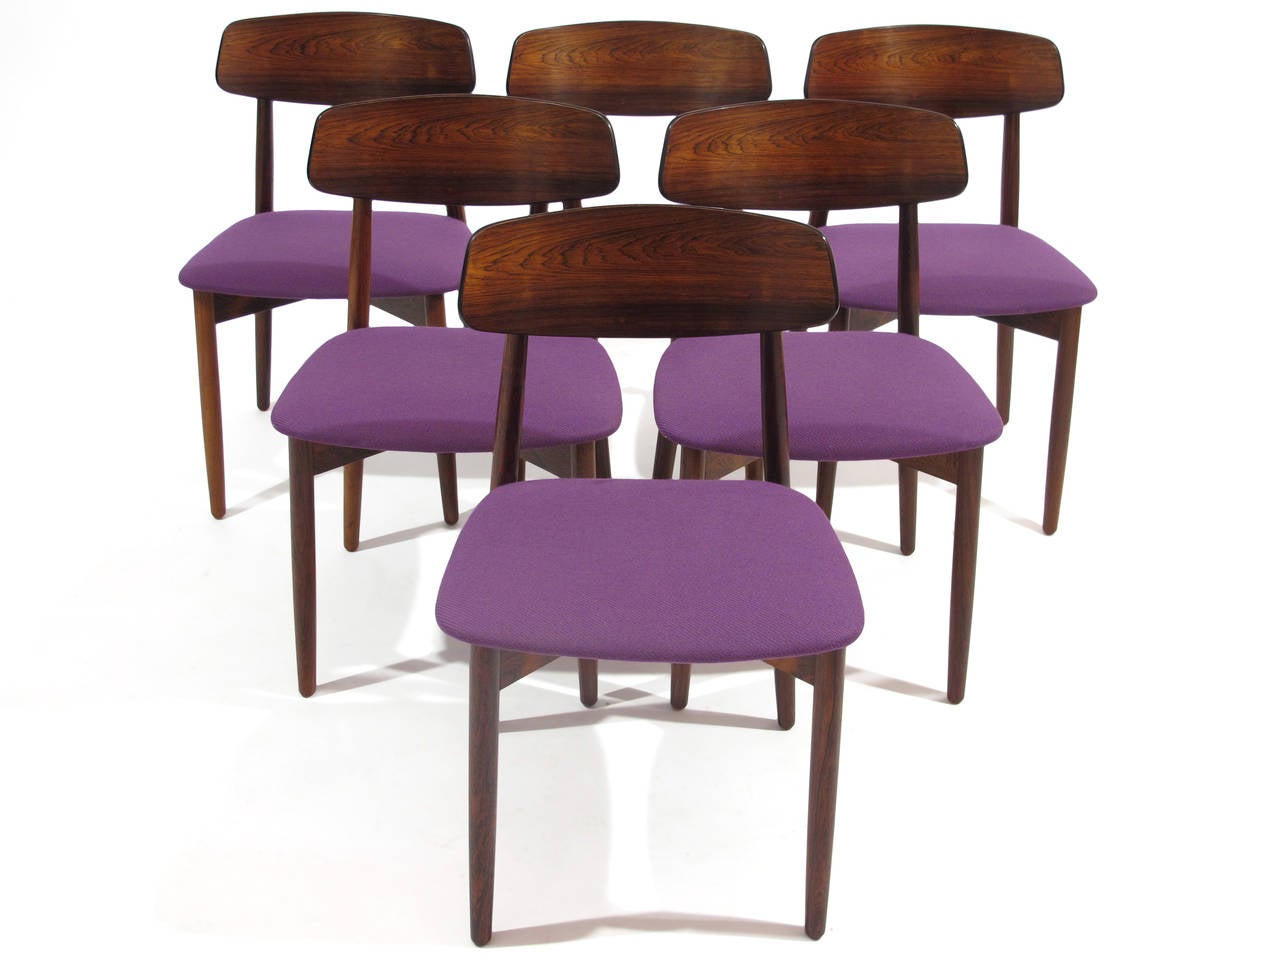 20th Century Six Danish Rosewood Dining Chairs - 18 Available